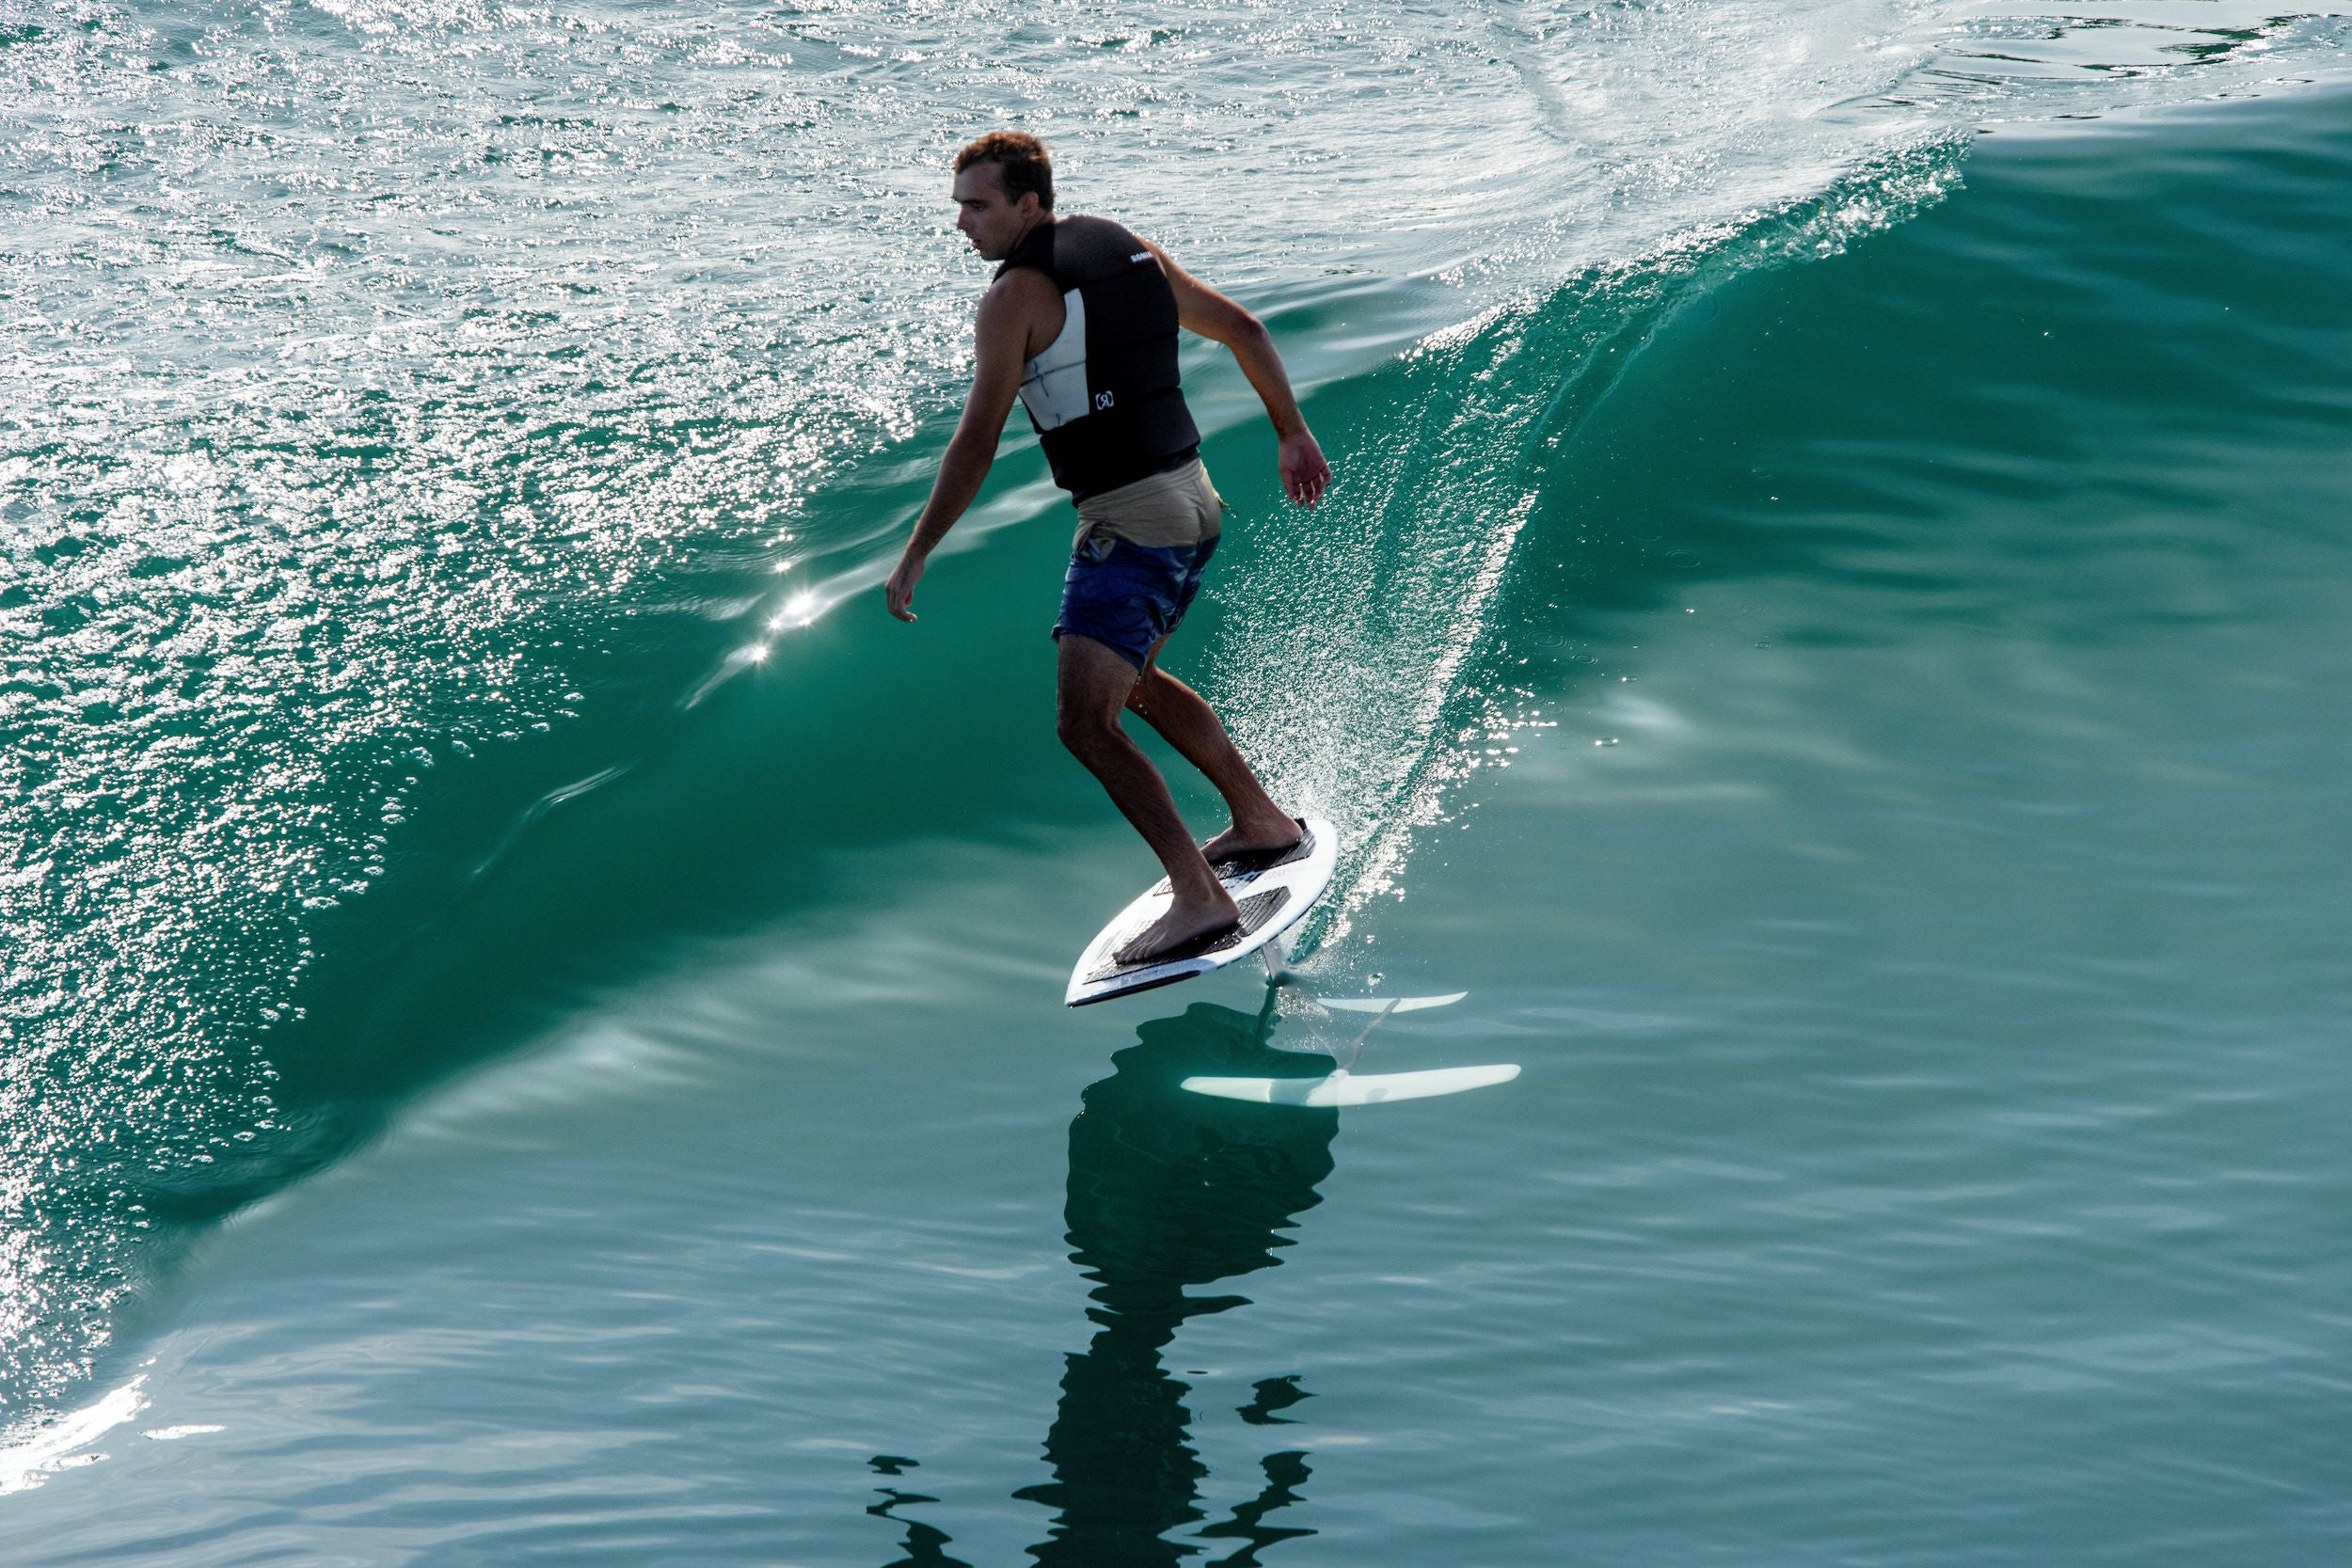 A man riding a wave on a surfboard, showcasing his Ronix 2024 Supreme Yes Men's CGA Vest's supreme buoyancy and mobility.